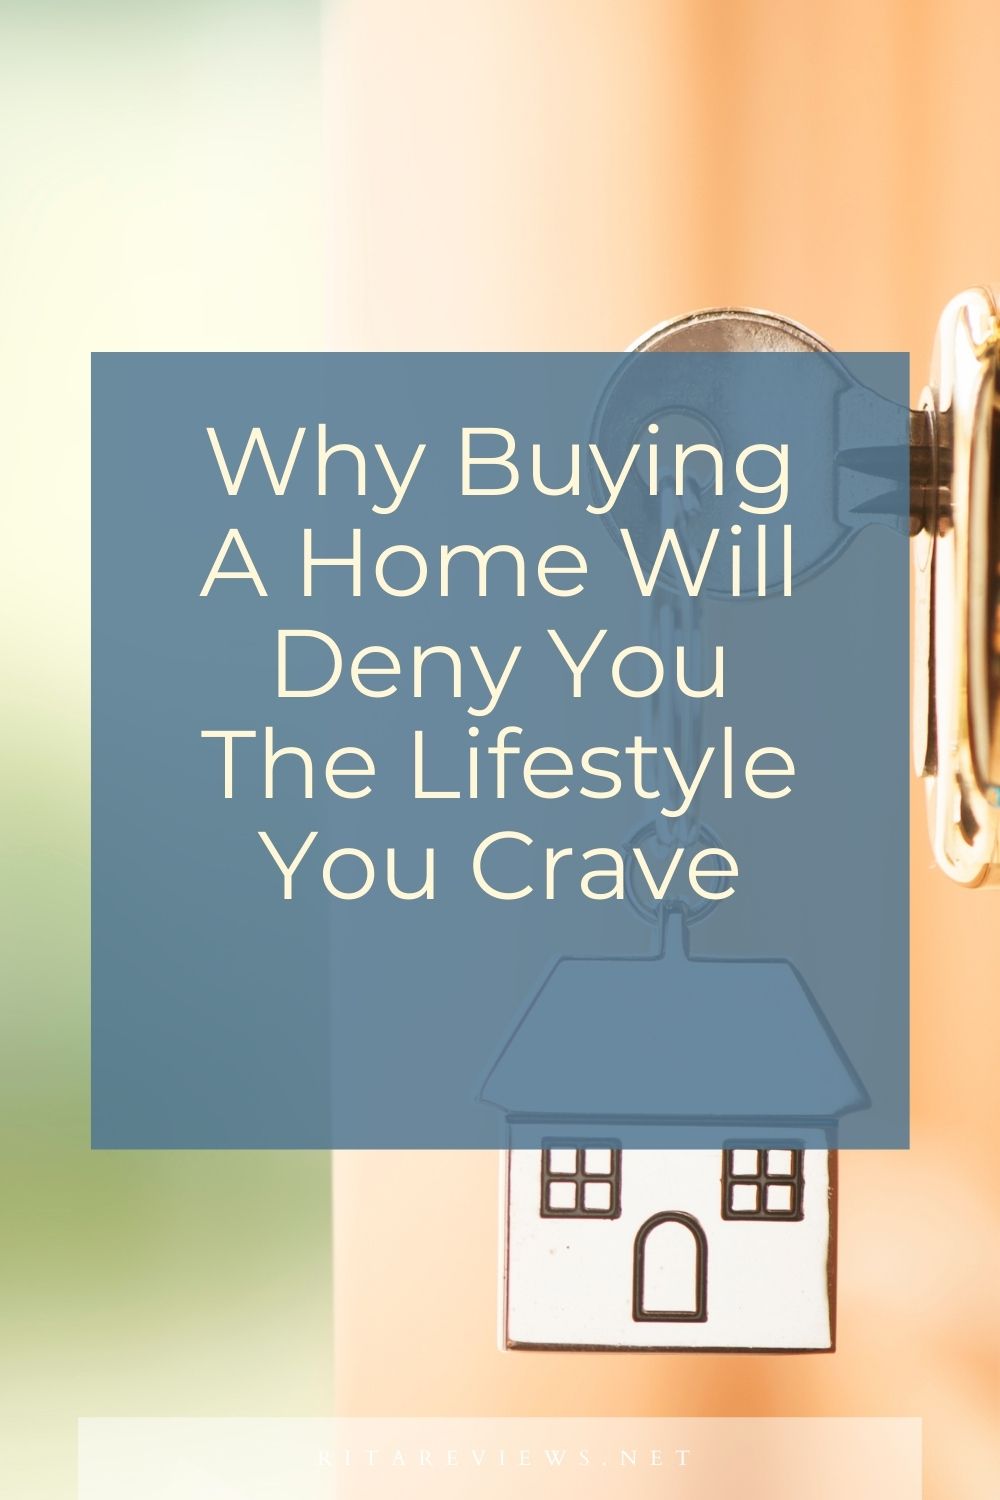 Why Buying A Home Will Deny You The Lifestyle You Crave